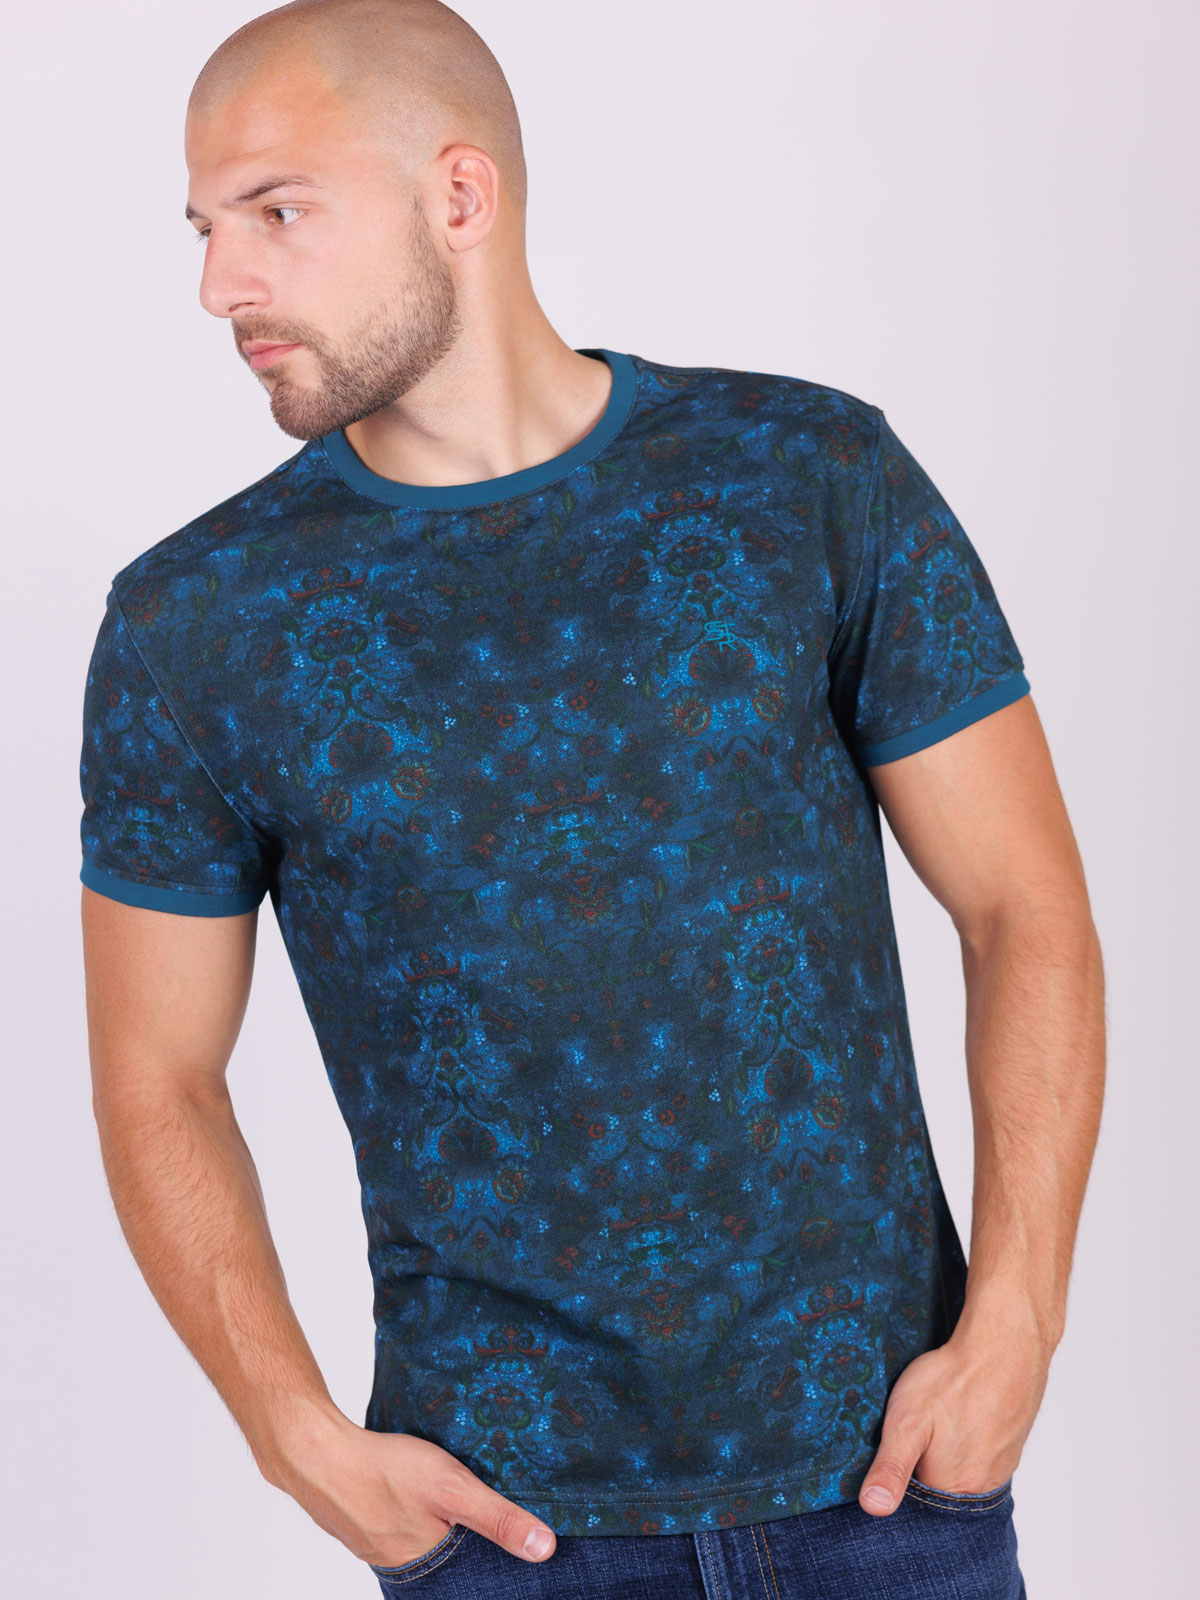 Tshirt turquoise with flowers - 95369 € 32.62 img4